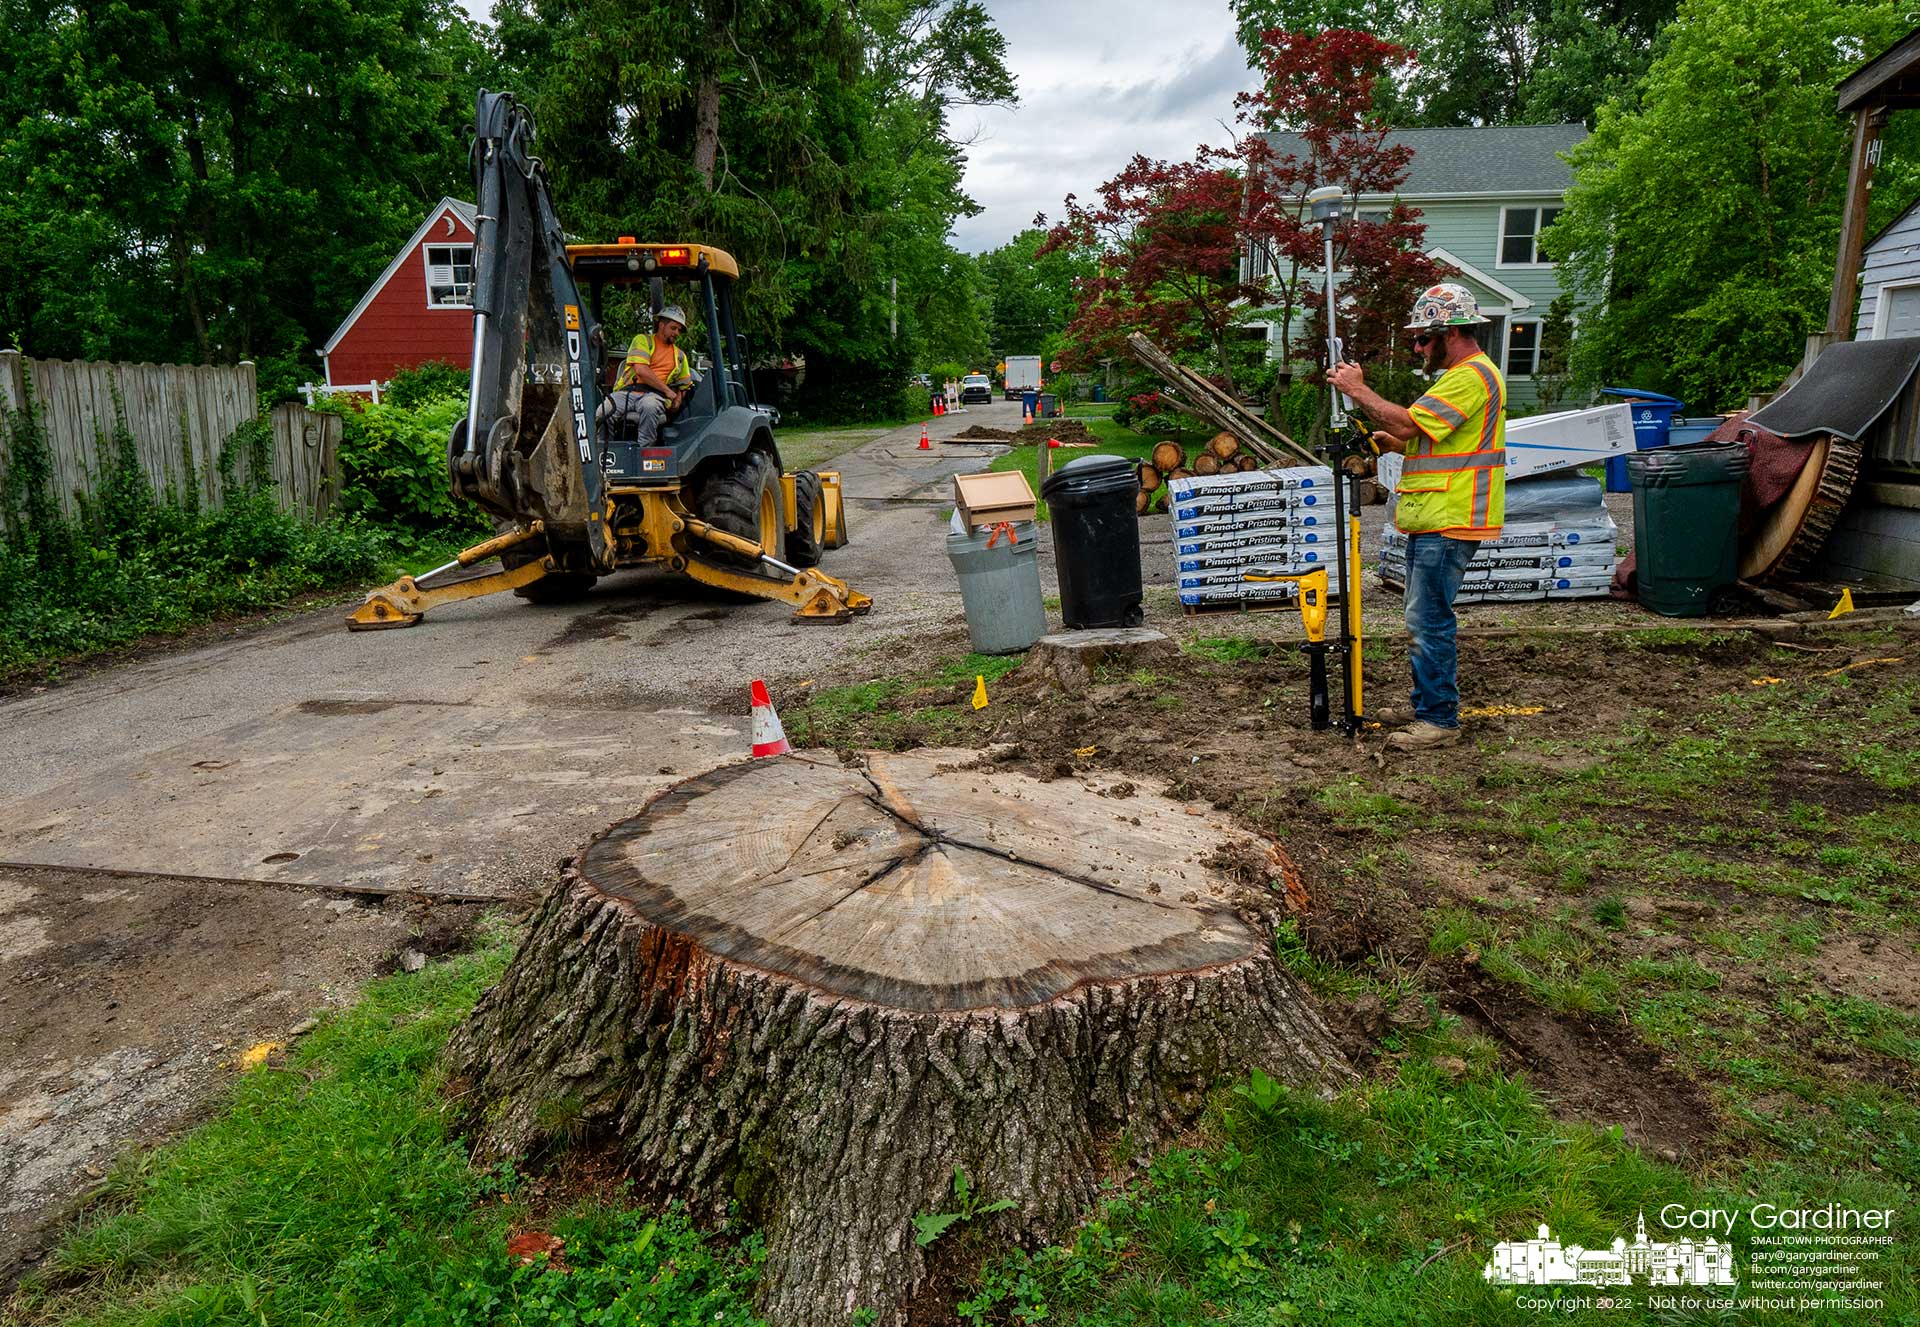 A pipeline crew uses a GPS locator to register location data for new gas lines installed during road construction along East Home Street and Whitehead. My Final Photo for June 7, 2022.